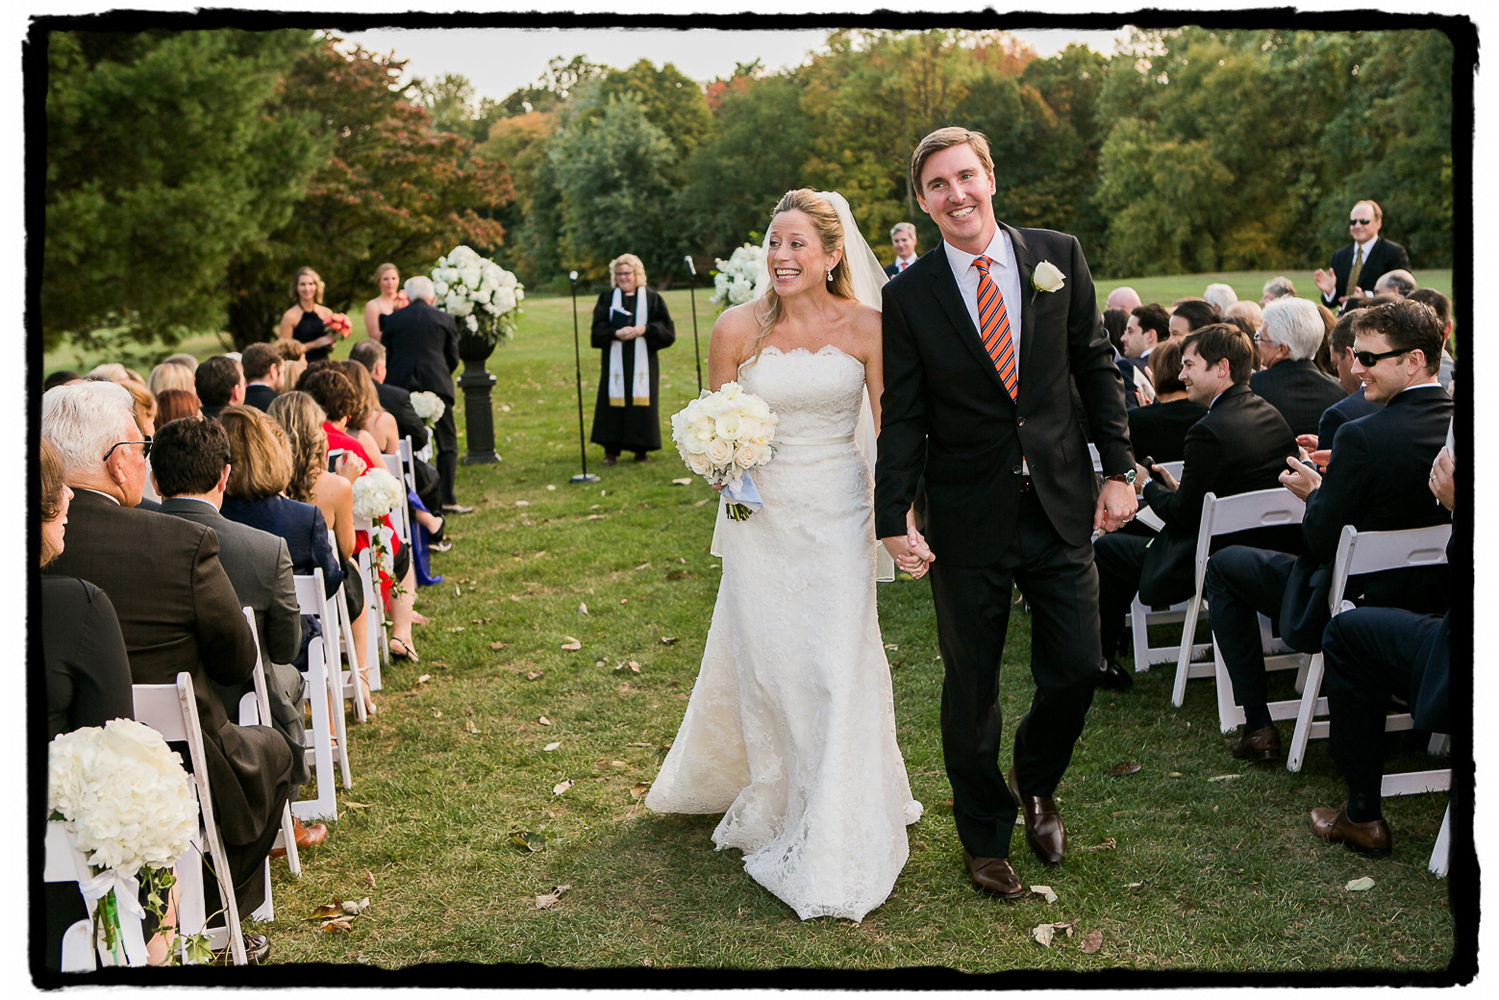 The smiles were contageous at Highlands Country Club as Noelle and Tim walked back down the aisle as husband and wife.